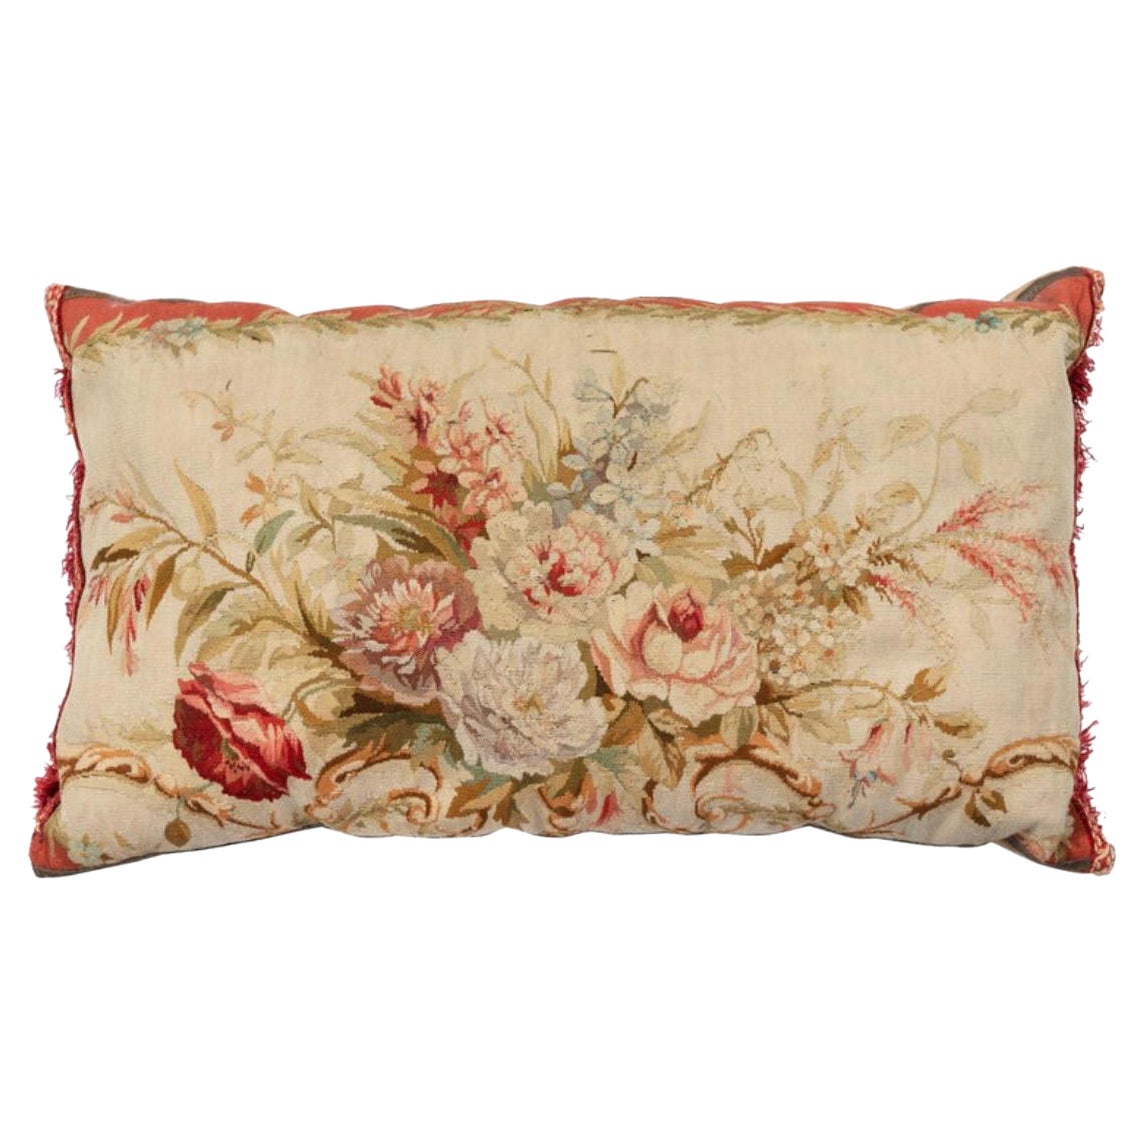 Antique 19th Century French Aubusson Tapestry Lumbar Pillow with Flowers